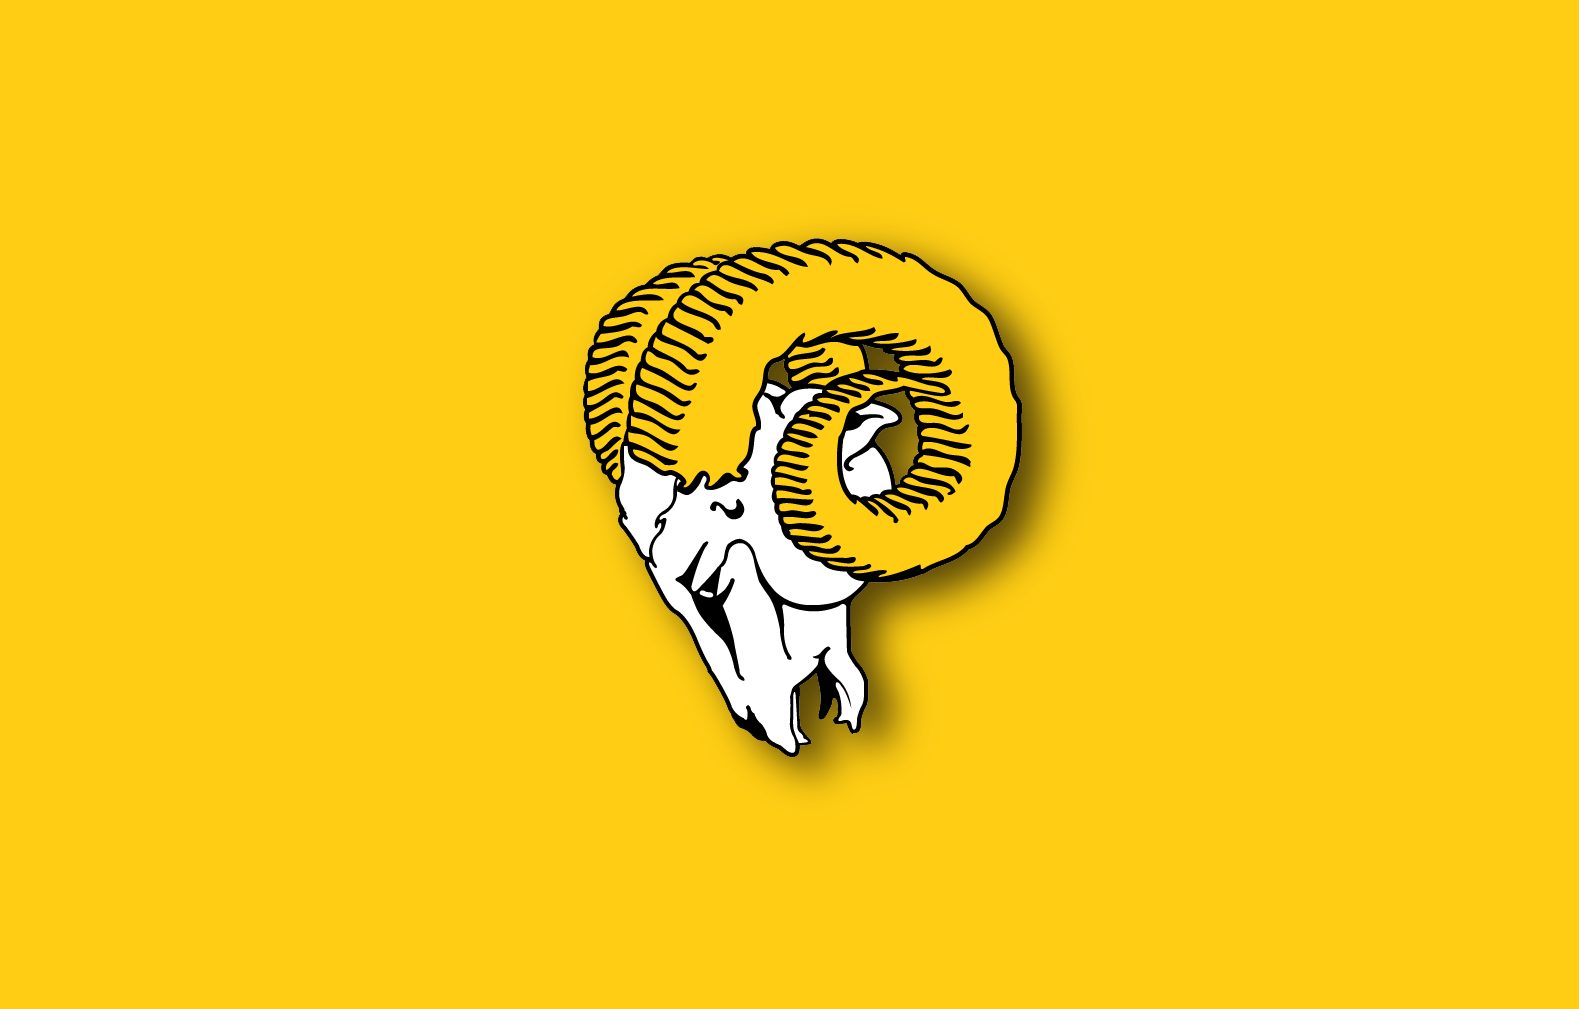 Simple classic Rams wallpaper that I made